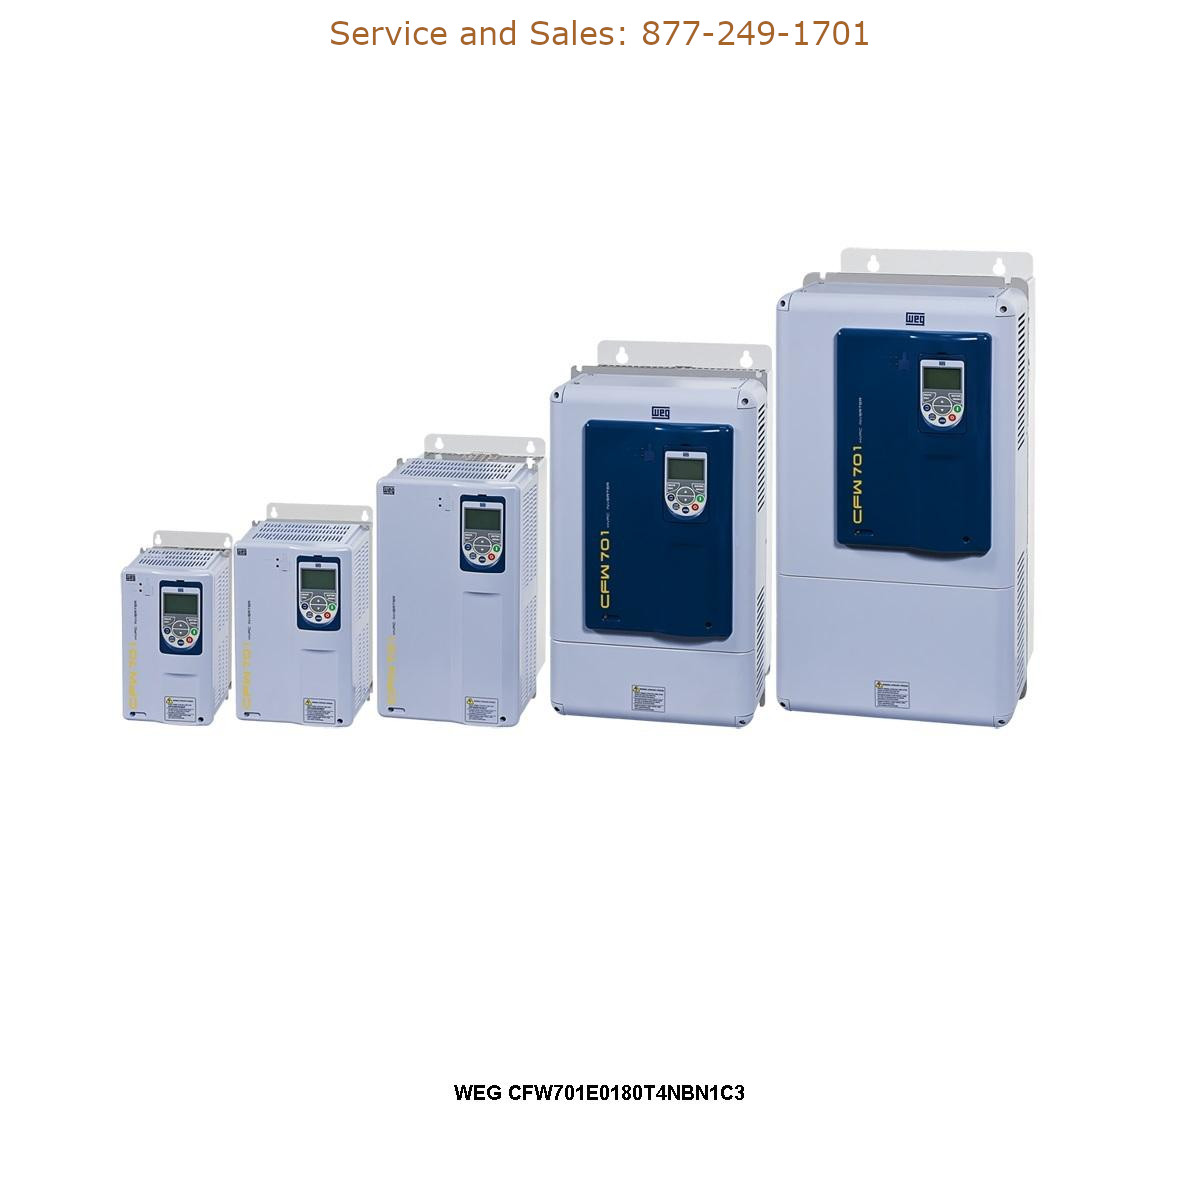 WEG CFW701E0180T4NBN1C3 WEG Model Number CFW701E0180T4NBN1C3 WEG Drives, Variable Speed Drives Repair Service, Troubleshooting, Replacement Parts https://gesrepair.com/wp-content/uploads/2022/WEG/WEG_CFW701E0180T4NBN1C3_Drives_Variable_Speed_Drives.jpg